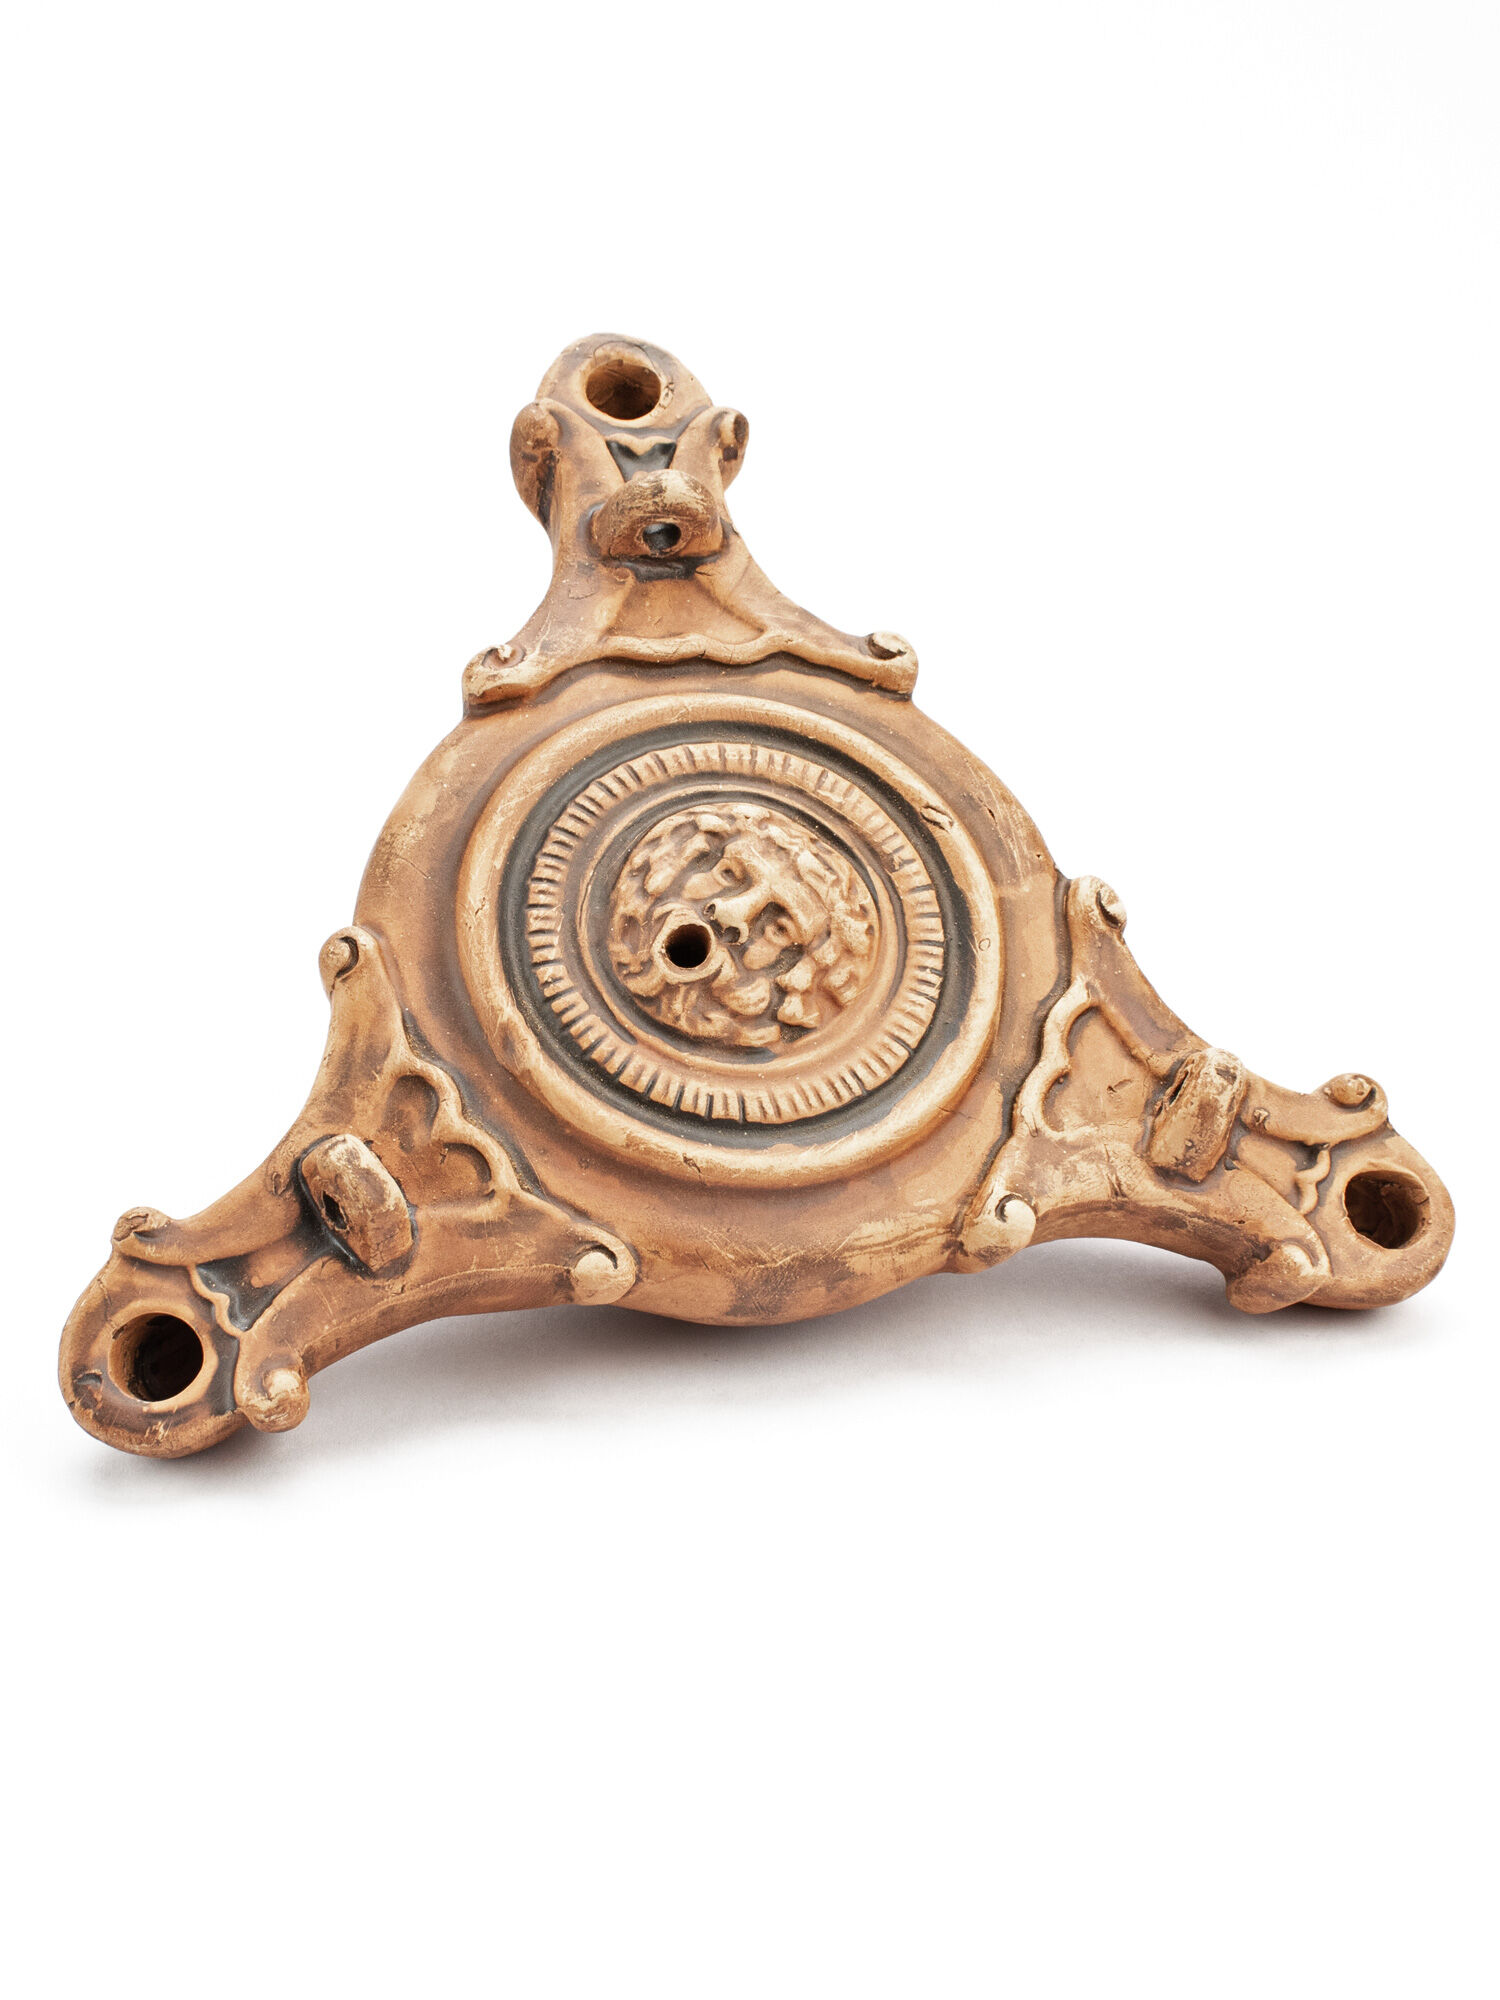 Støt Metafor psykologisk Oil lamp 3 flames, antique Roman lamp made of clay - The Romans